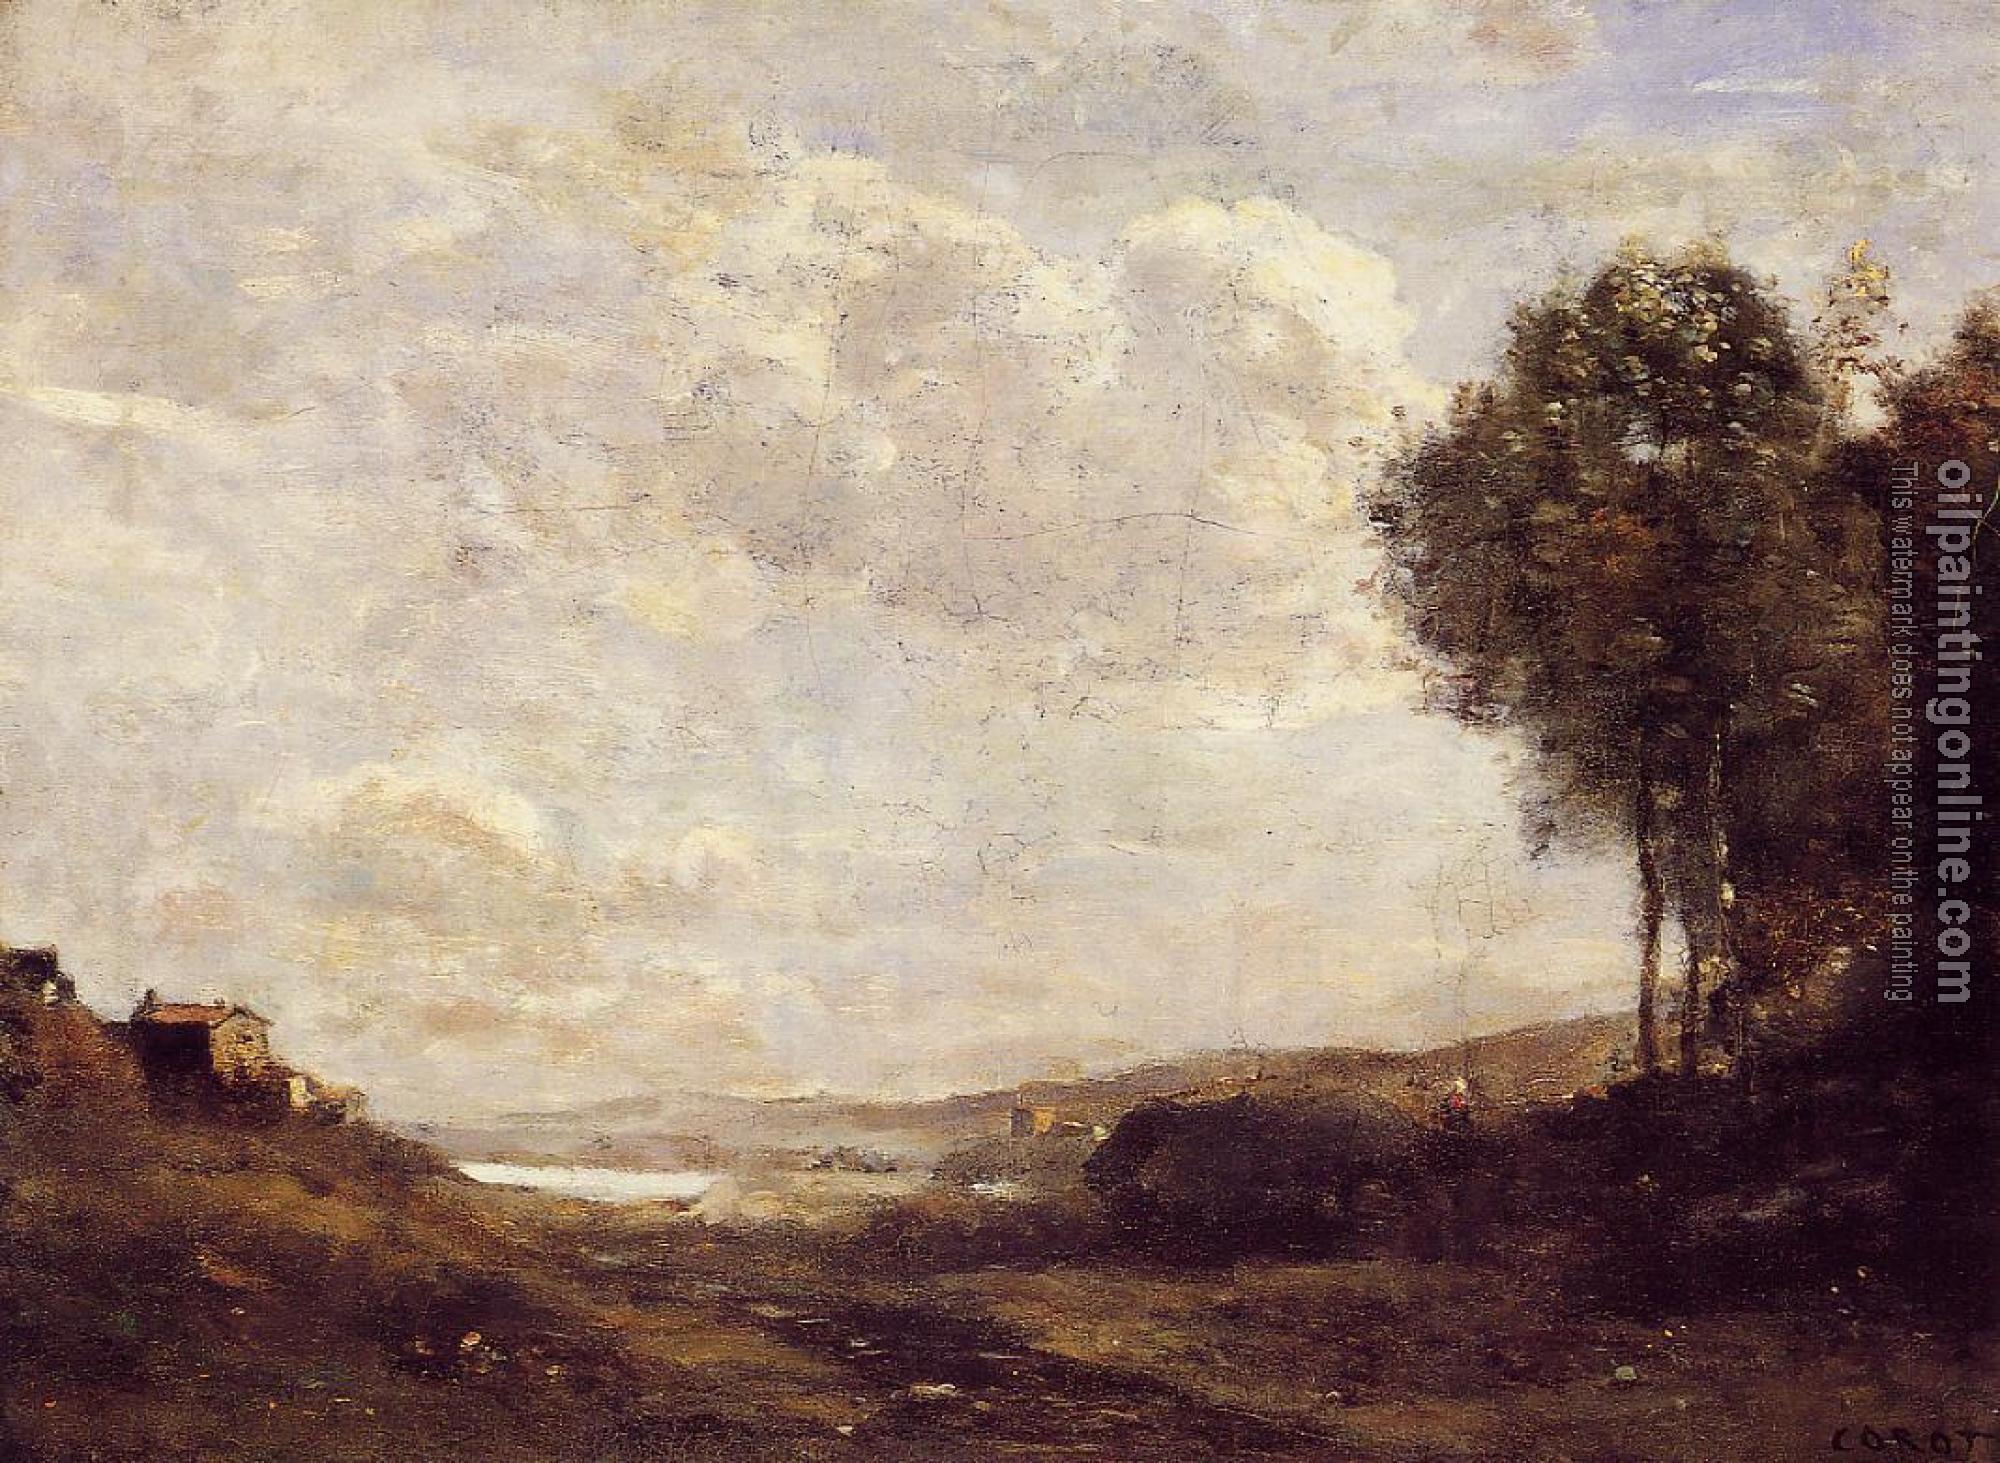 Corot, Jean-Baptiste-Camille - Landscape by the Lake